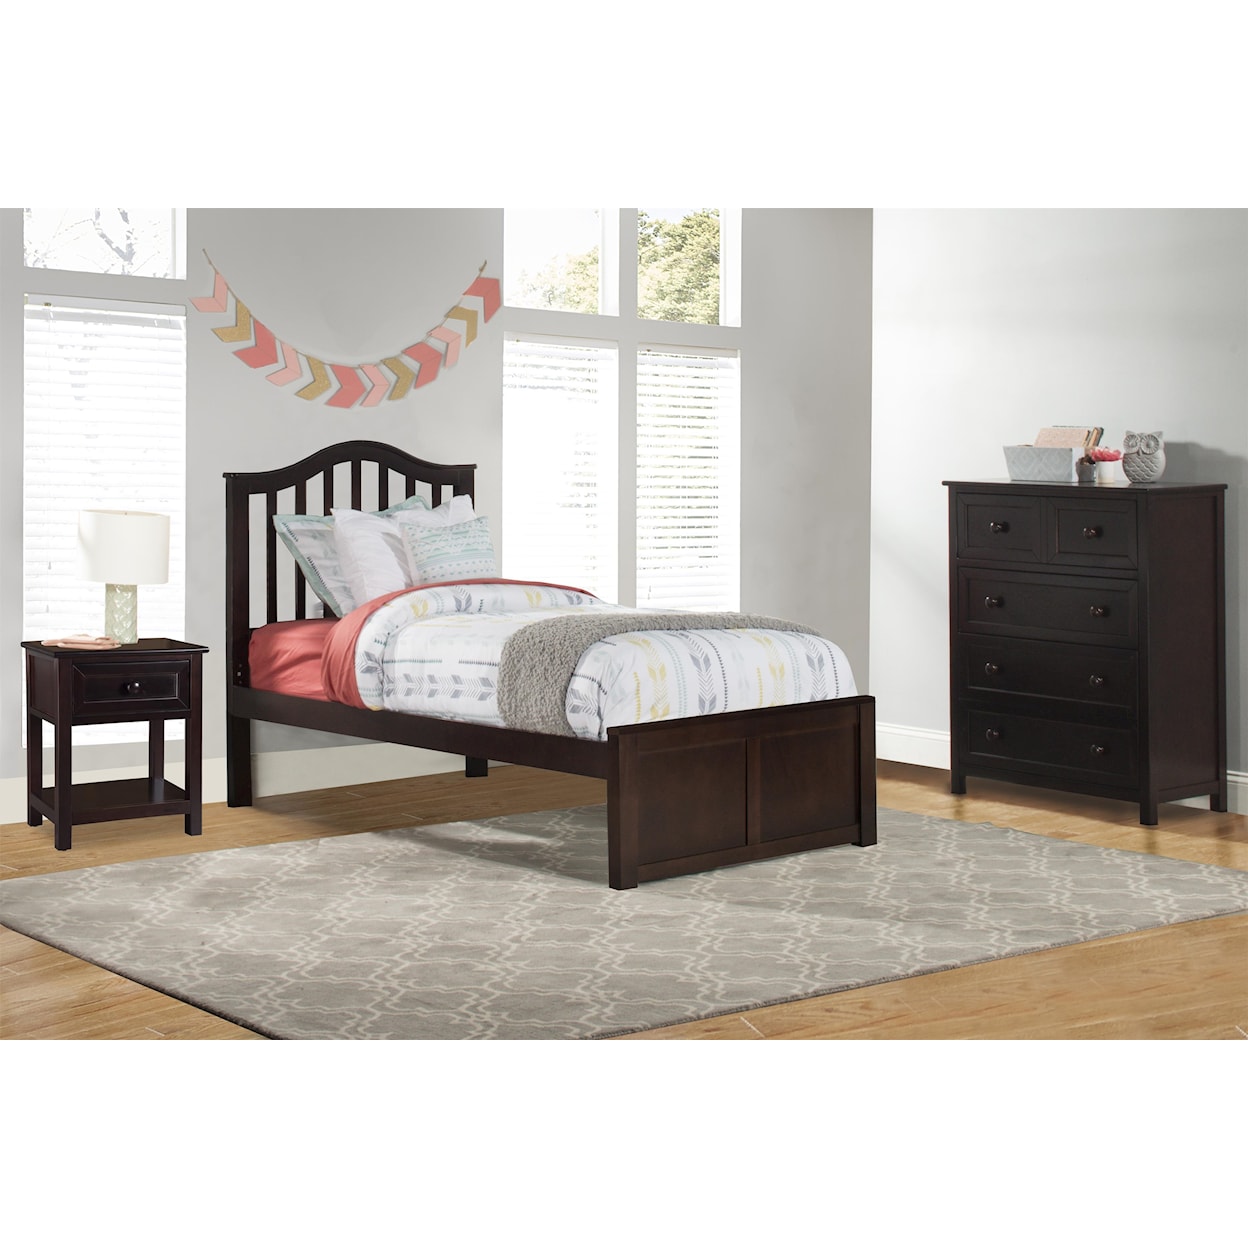 Hillsdale Schoolhouse Twin Bed